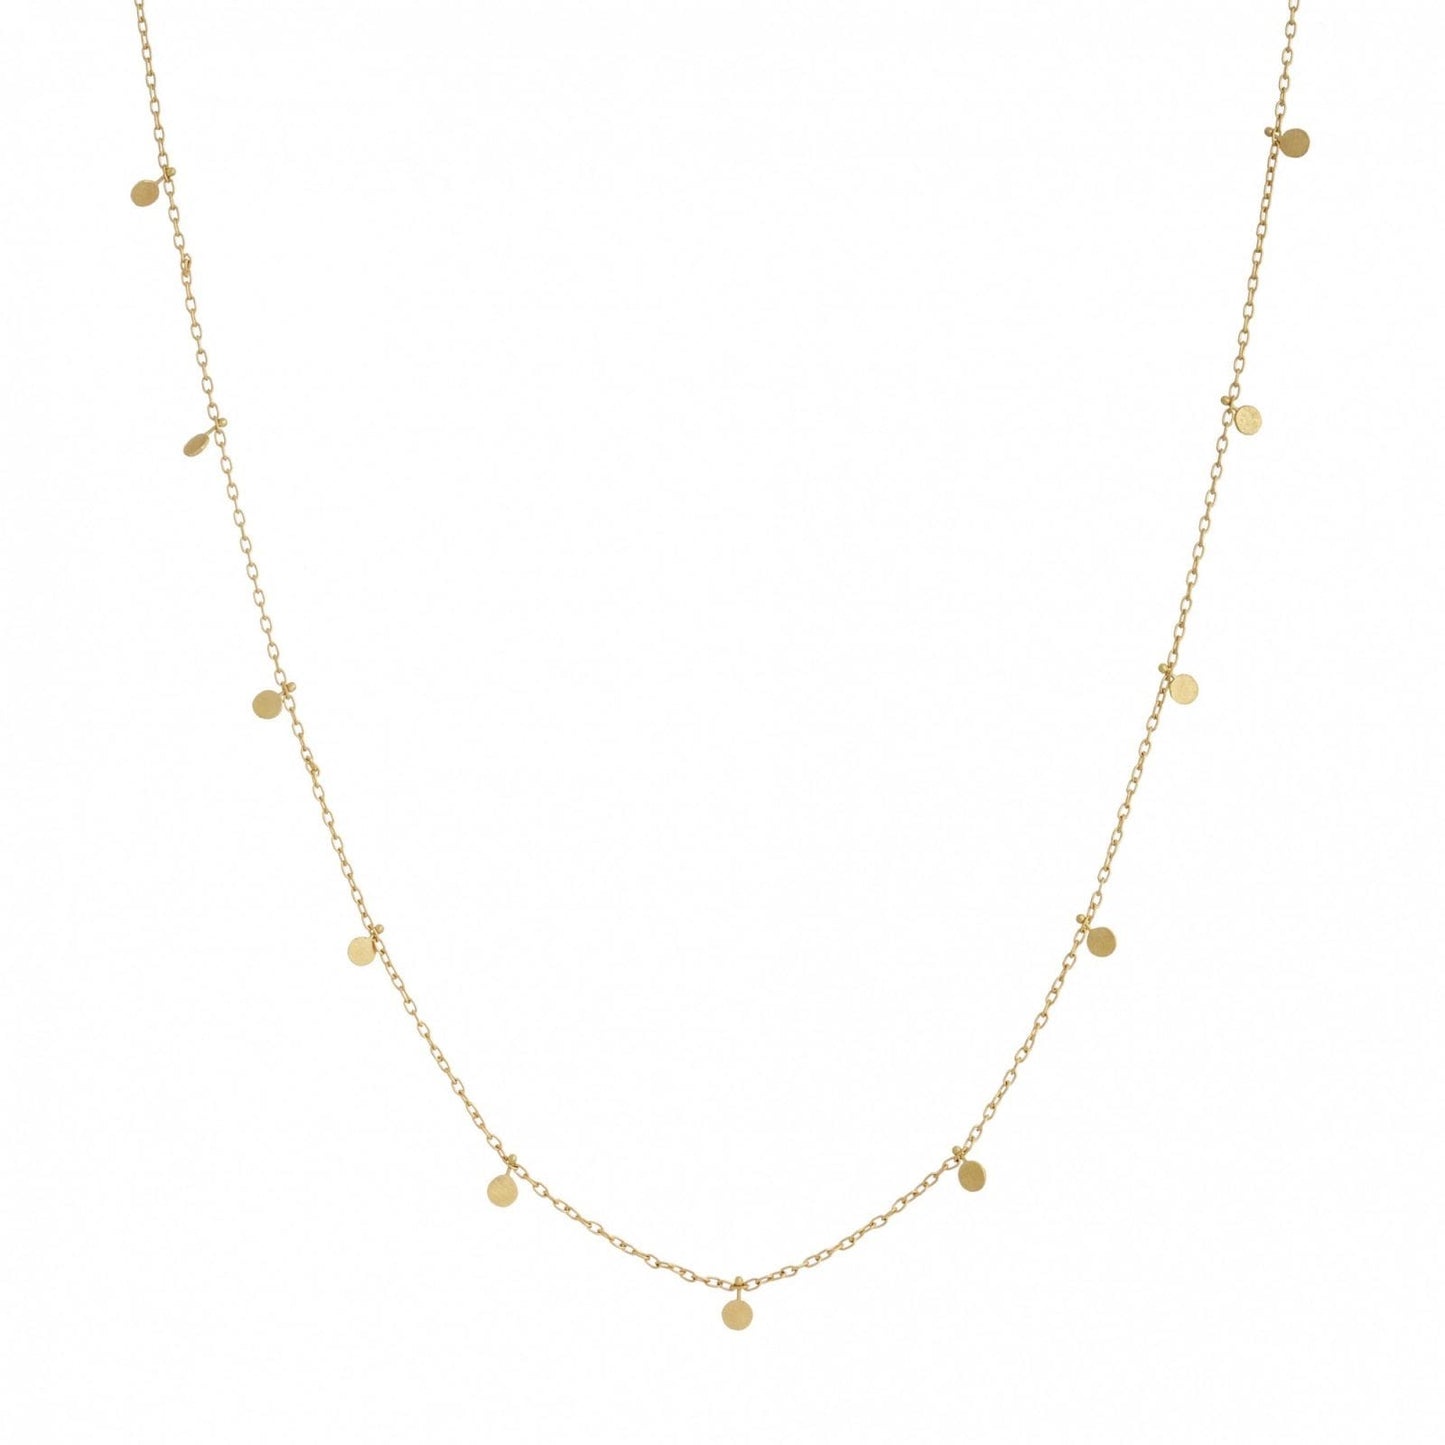 NKL-18K 18k Yellow Gold Evenly Scattered Dots Necklace